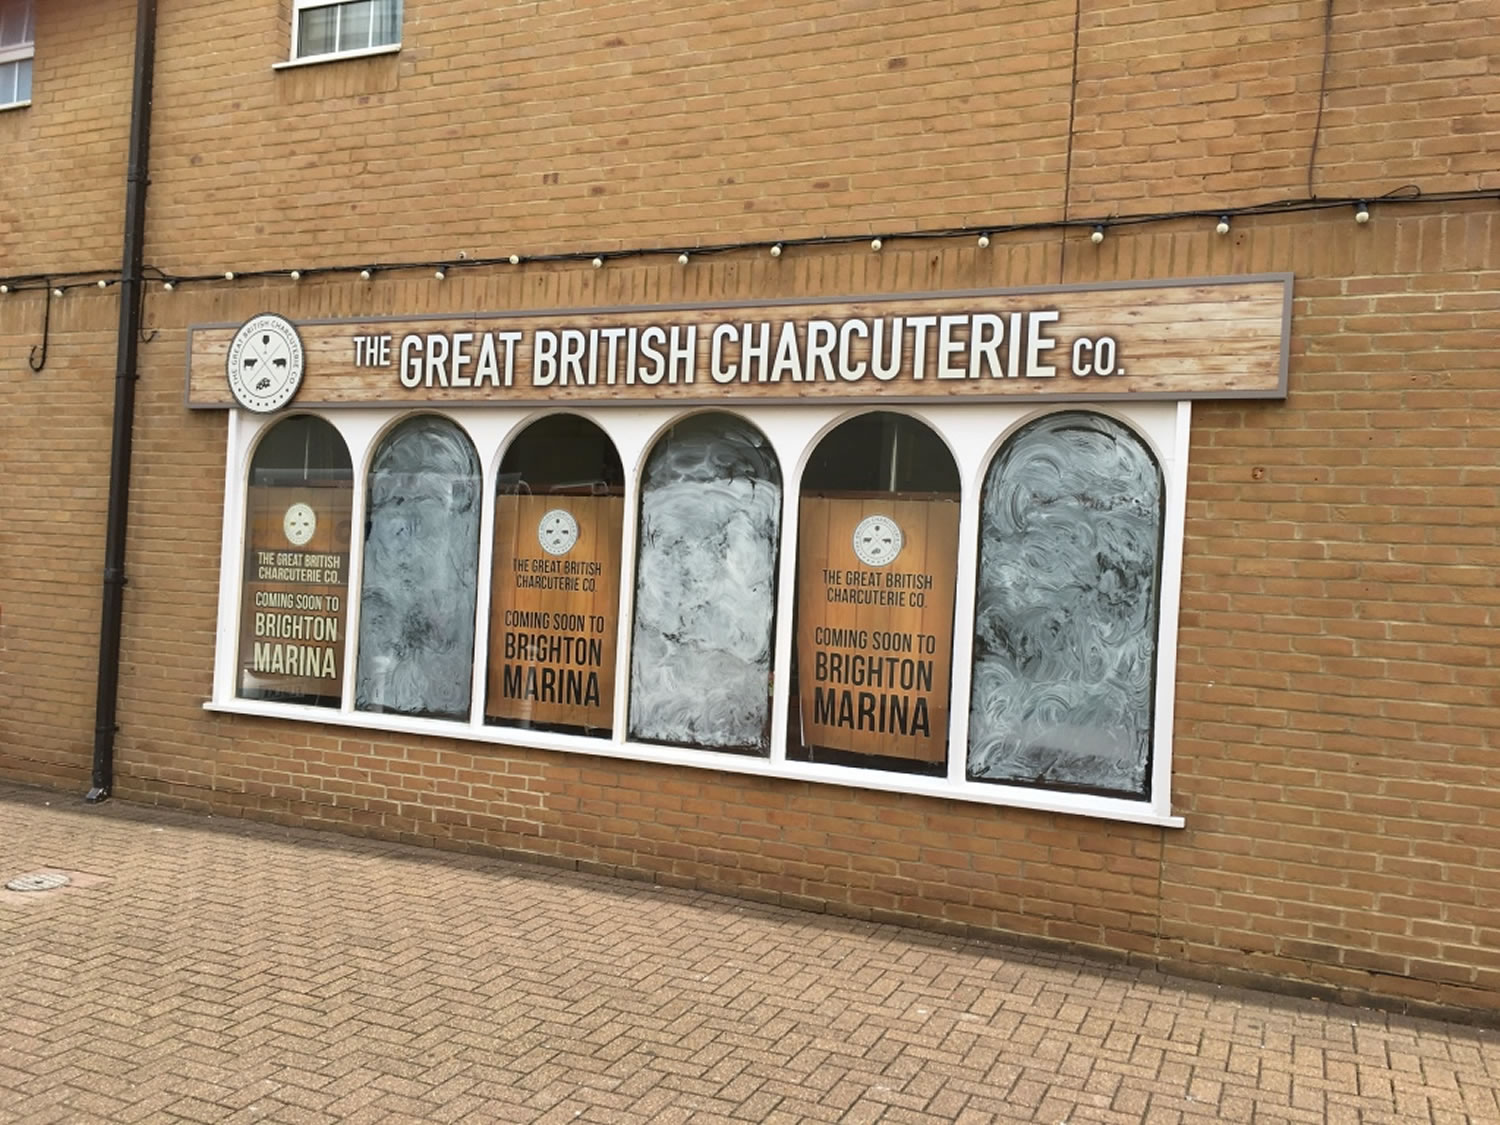 The Great British Charcuterie Co.